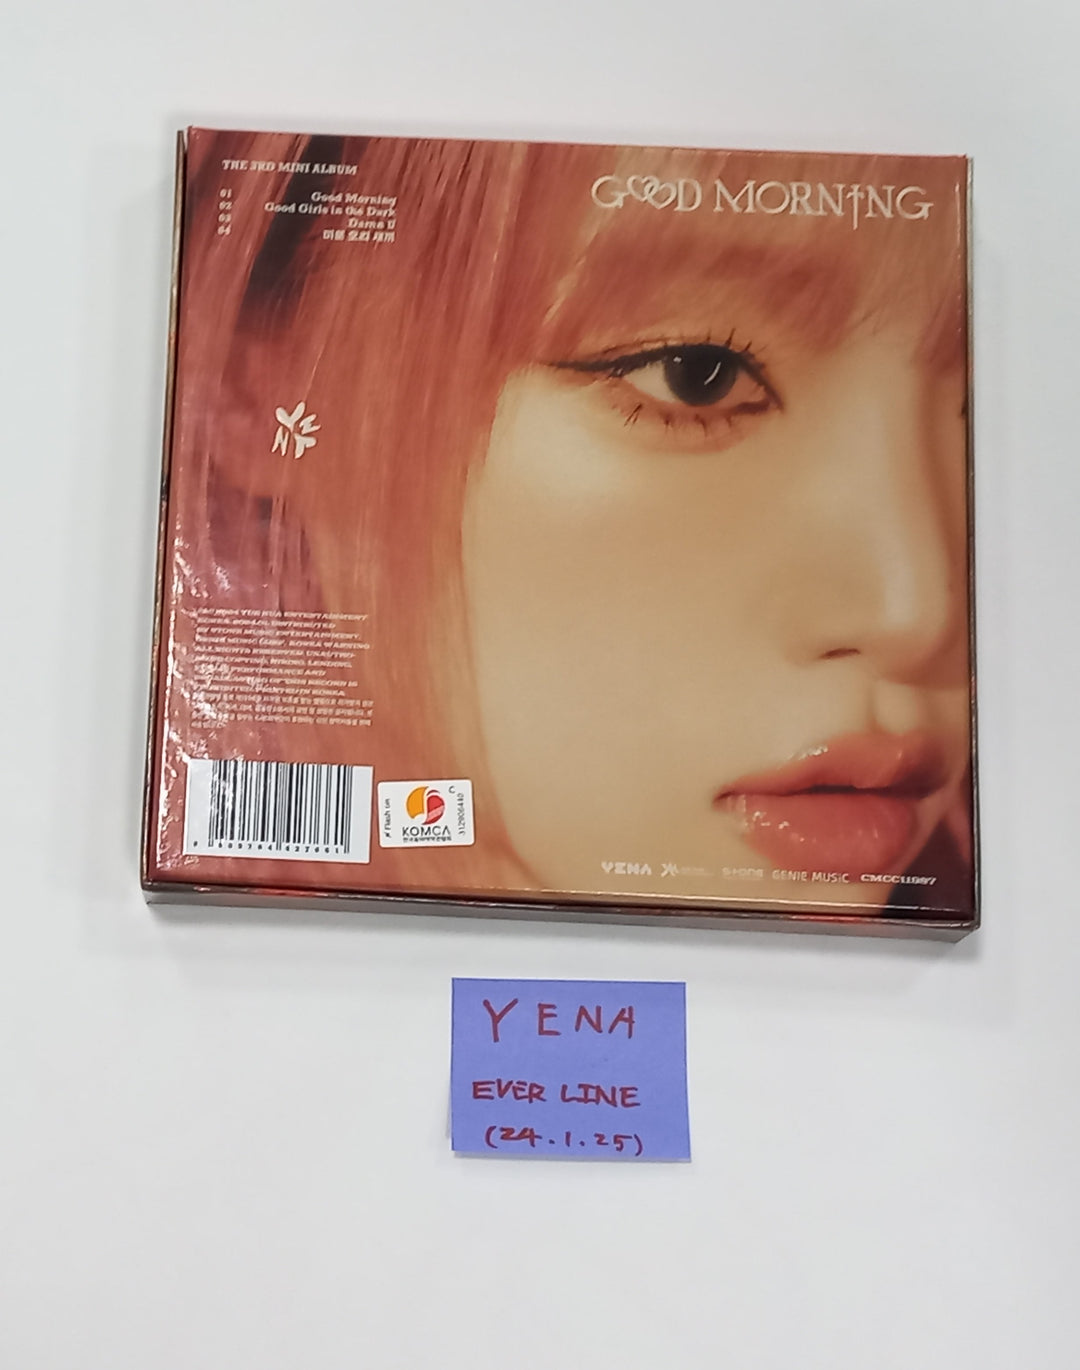 Yena "Good Morning" 3rd Mini - Hand Autographed(Signed) Album [24.1.25]